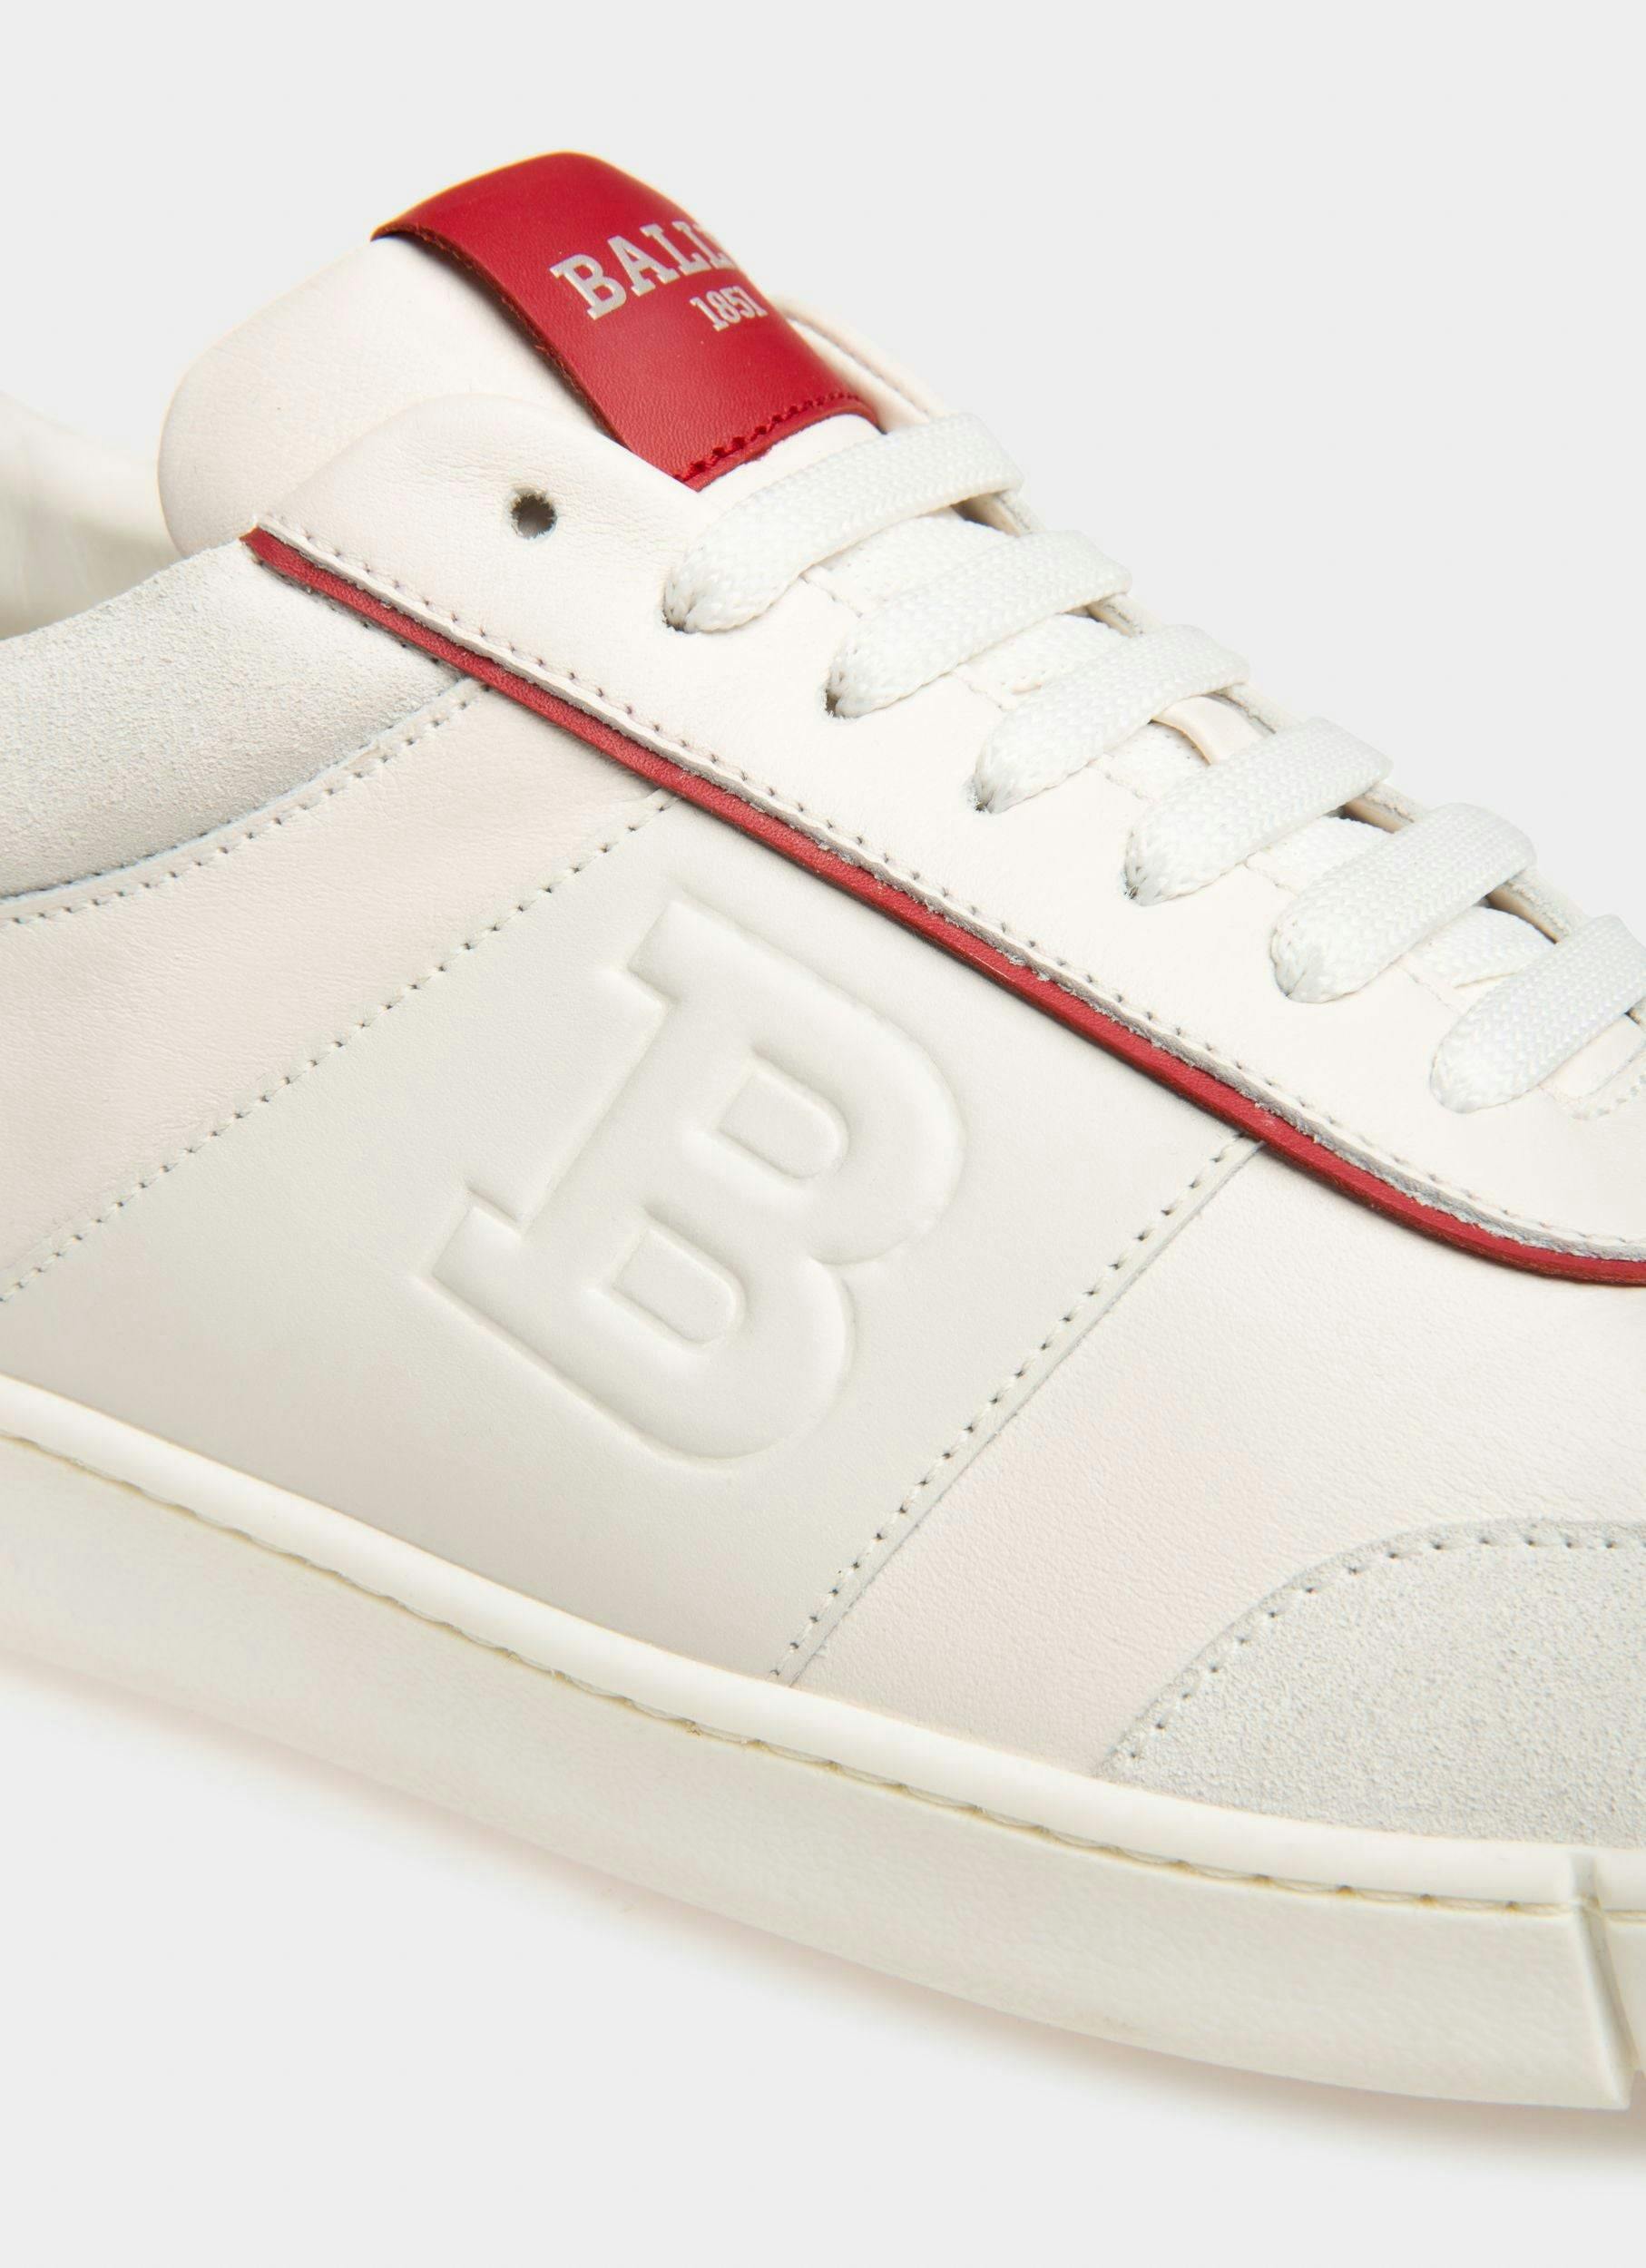 Wallys Leather And Suede Sneaker In White And Red - Men's - Bally - 06